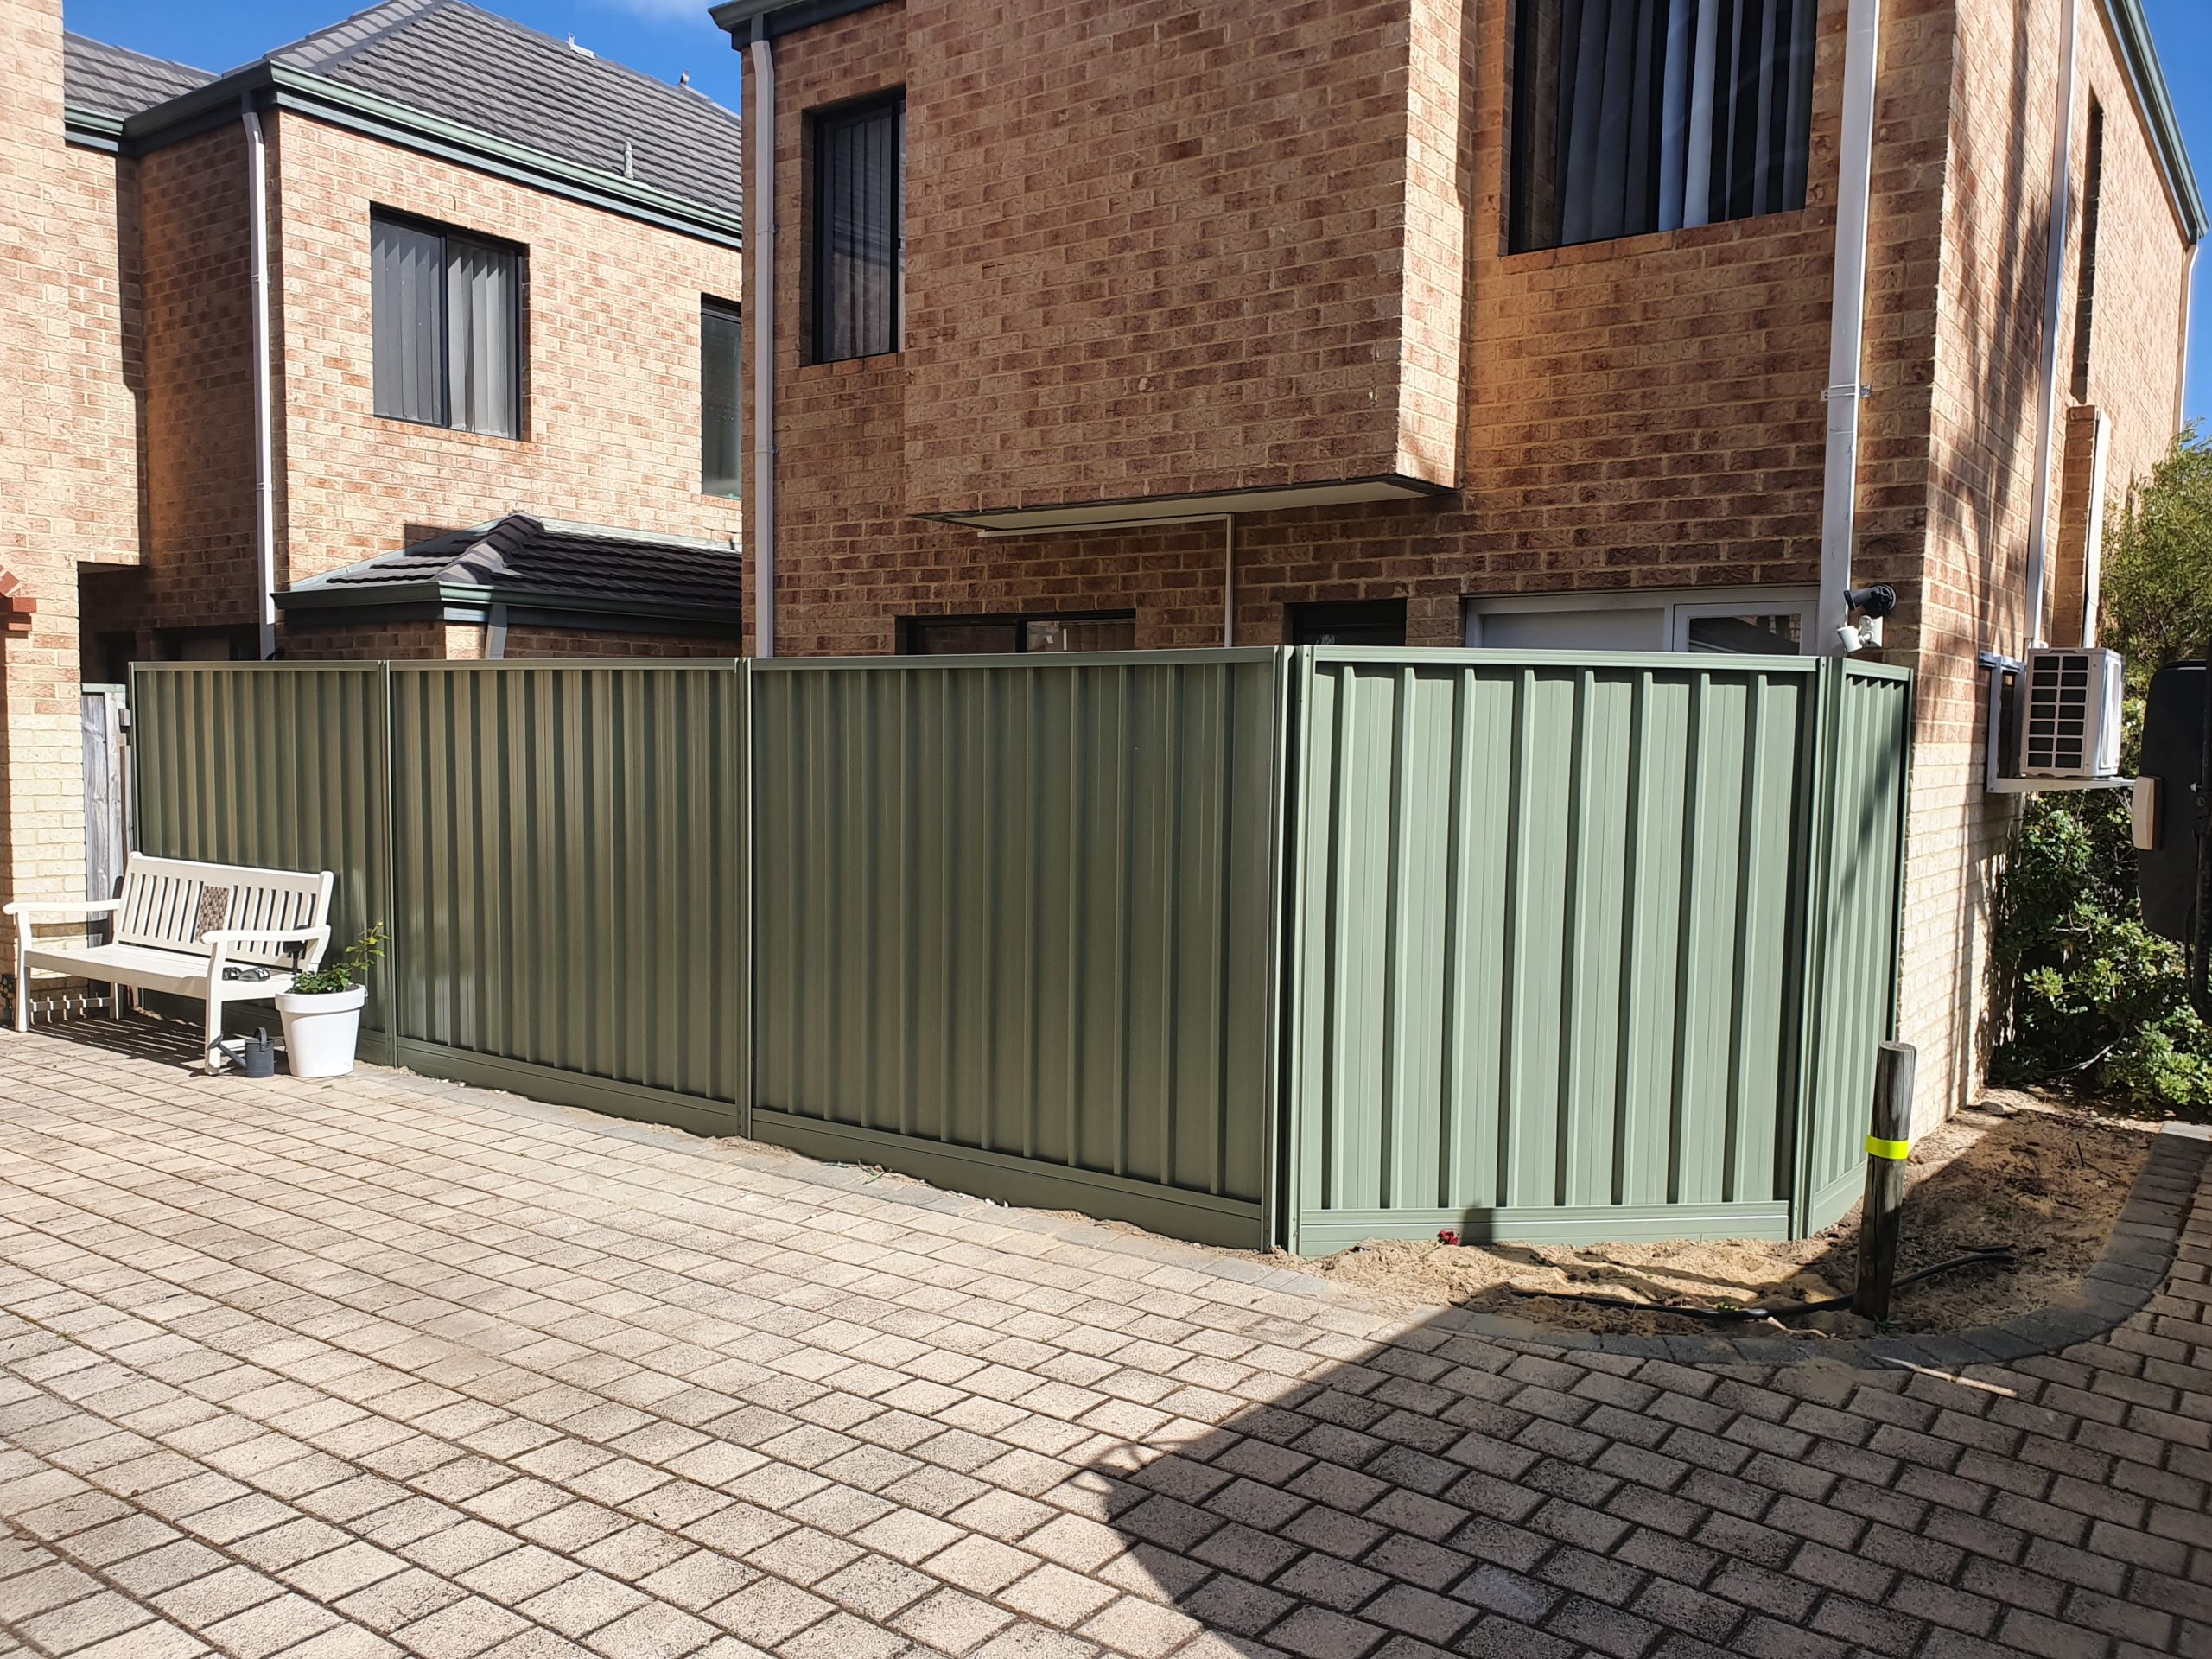 Colorbond fence installation in Perth, featuring sturdy steel panels available in a range of colors to match the surrounding landscape or house exterior. Colorbond fences are known for their durability, low maintenance, and ability to withstand harsh weather conditions, making them an ideal choice for residential and commercial properties in Perth. The fence installation team can customize the design and height of the fence to meet the specific needs and preferences of the property owner, providing a practical and attractive boundary for the property